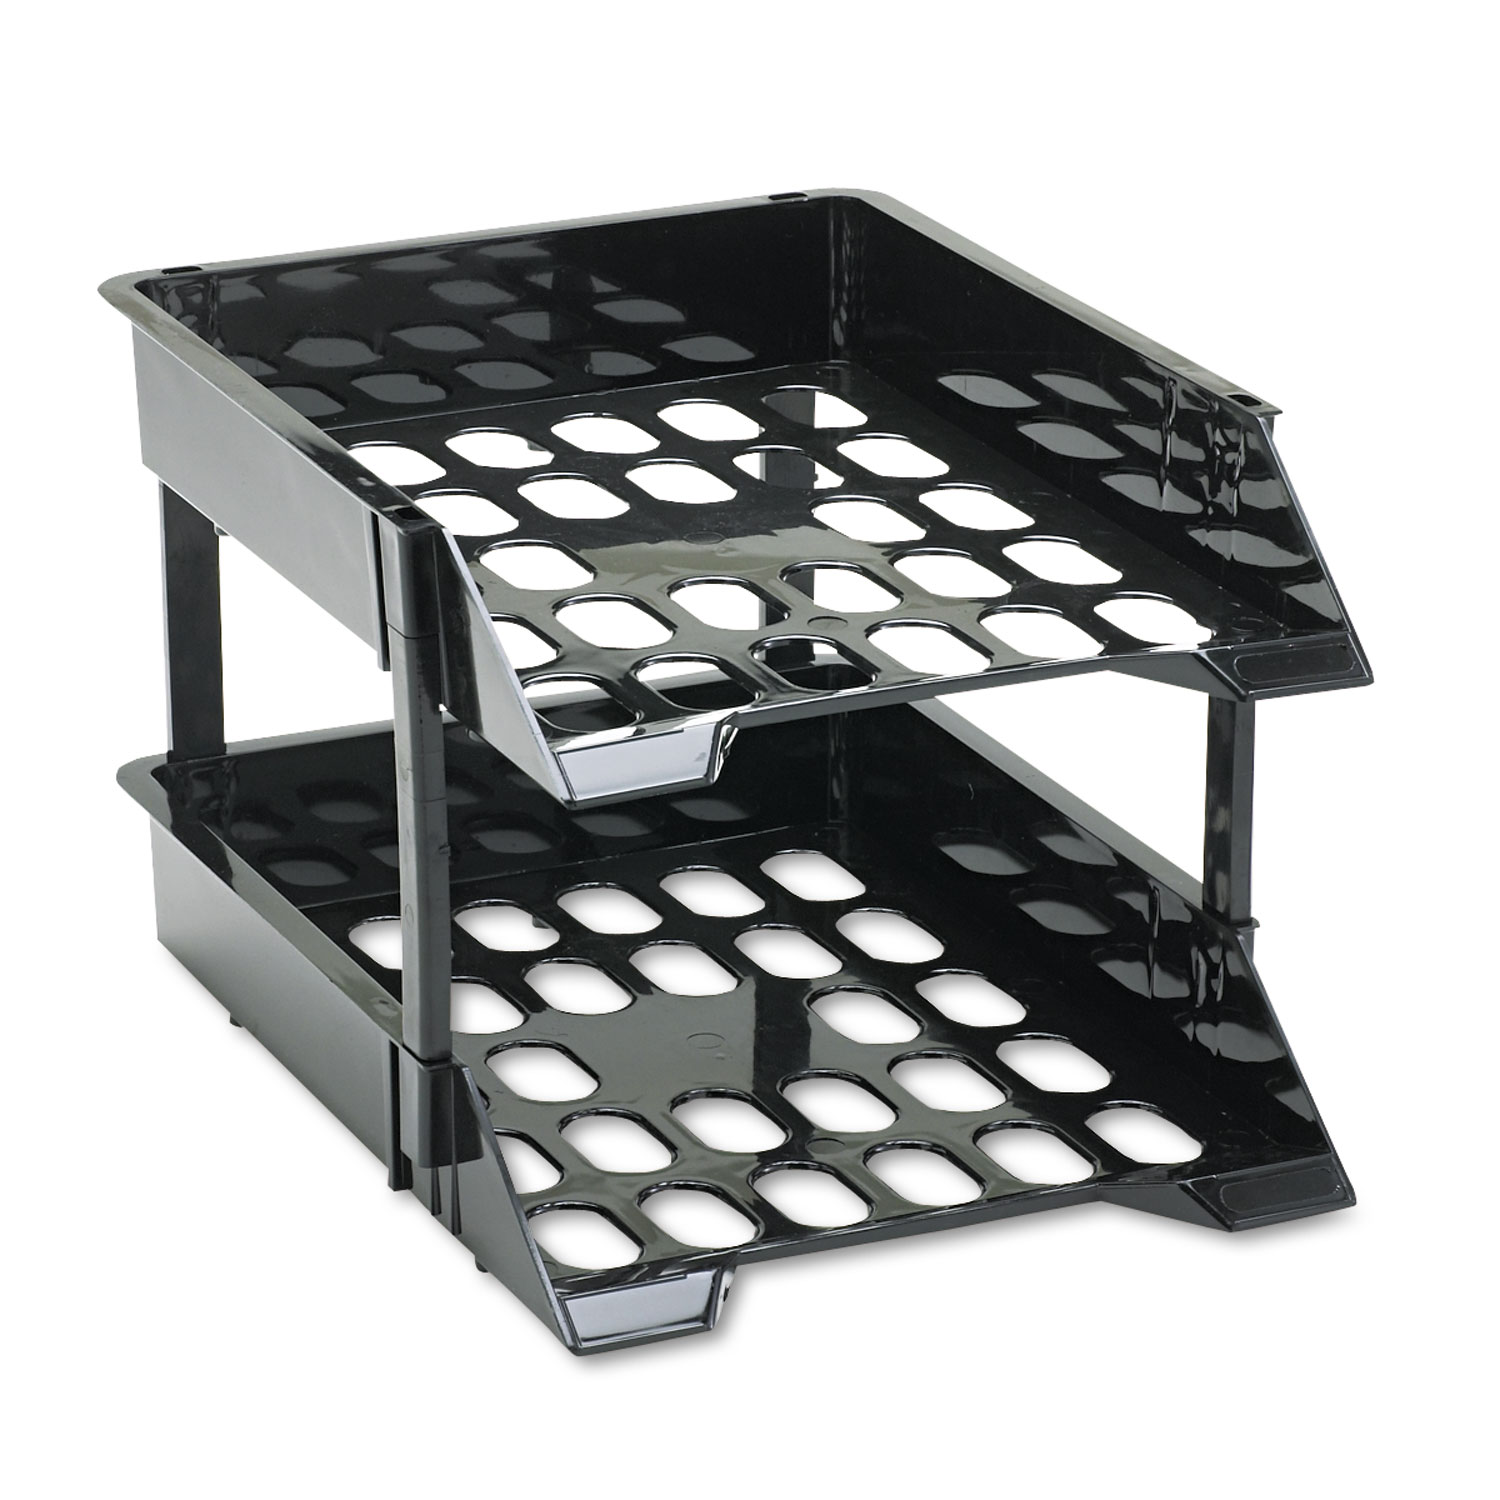 Super Tray Unbreakable Countertop Tray Set, Two Tier, Plastic, Black